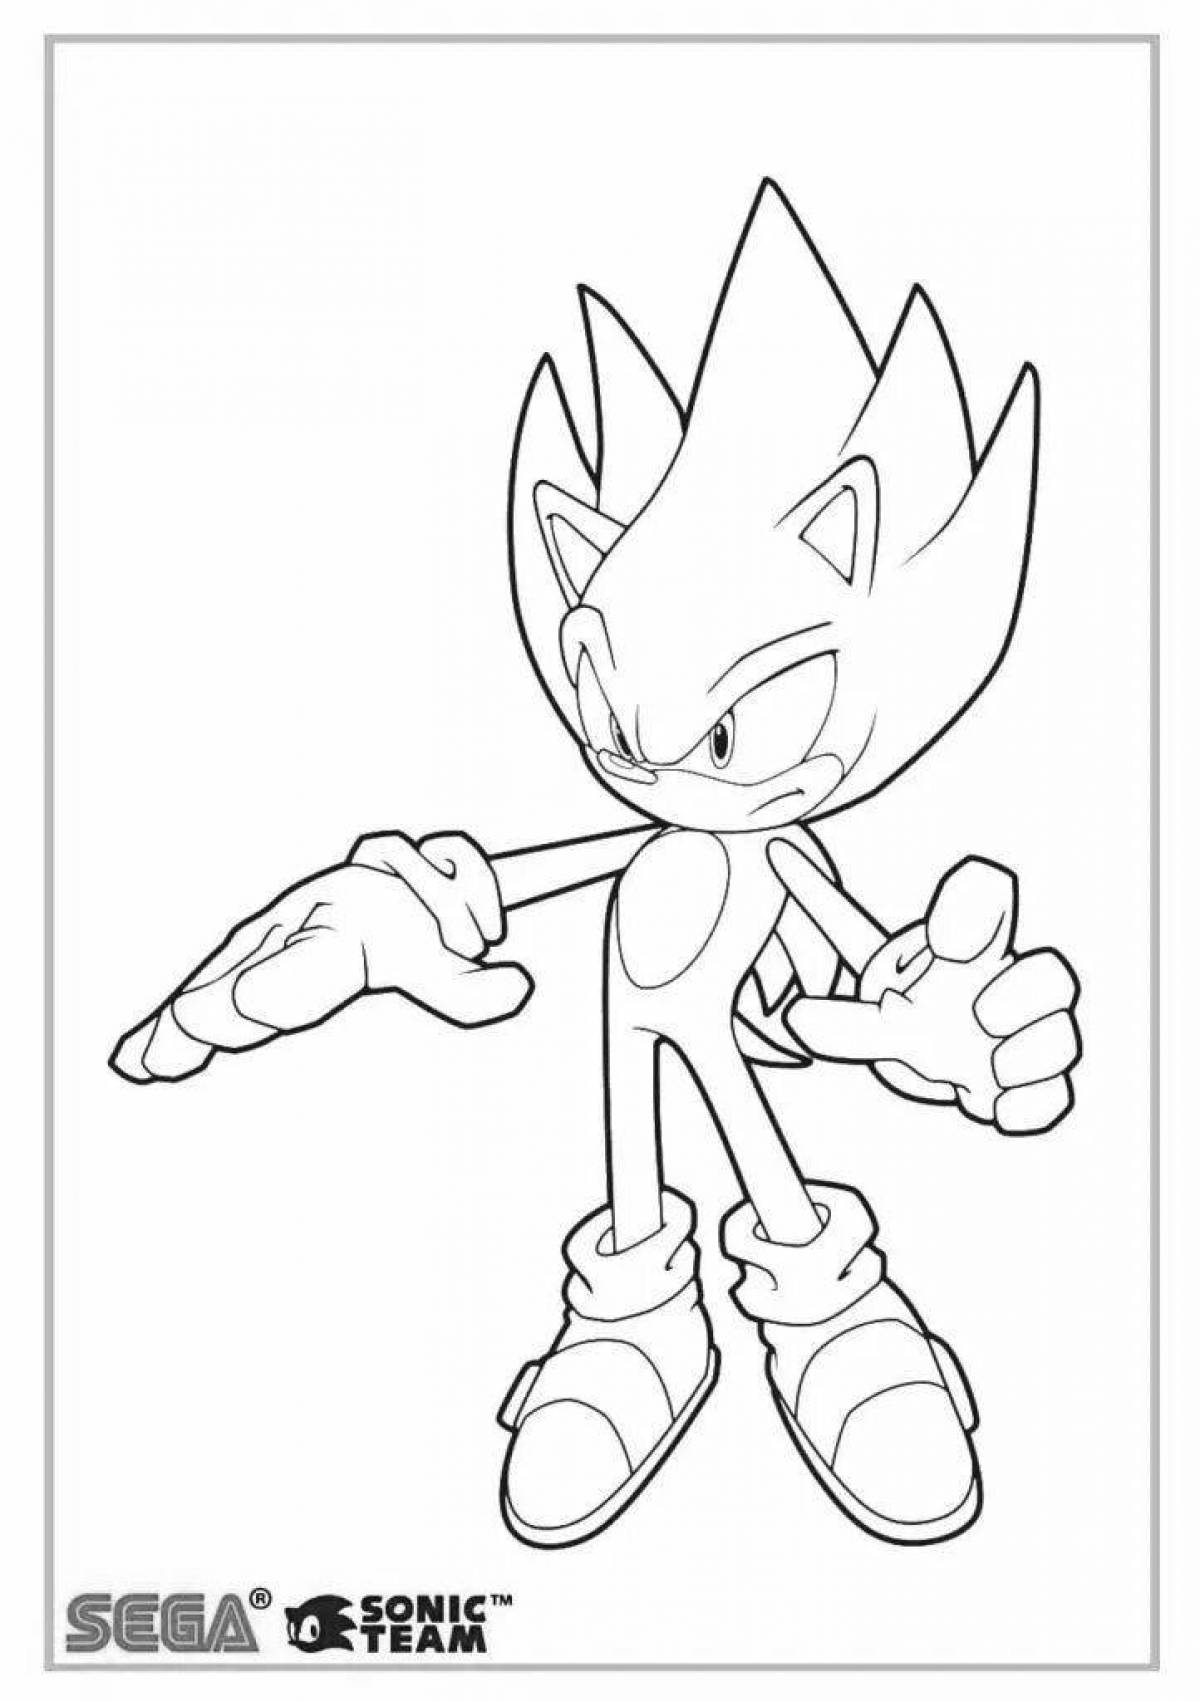 Gorgeous yellow sonic coloring page